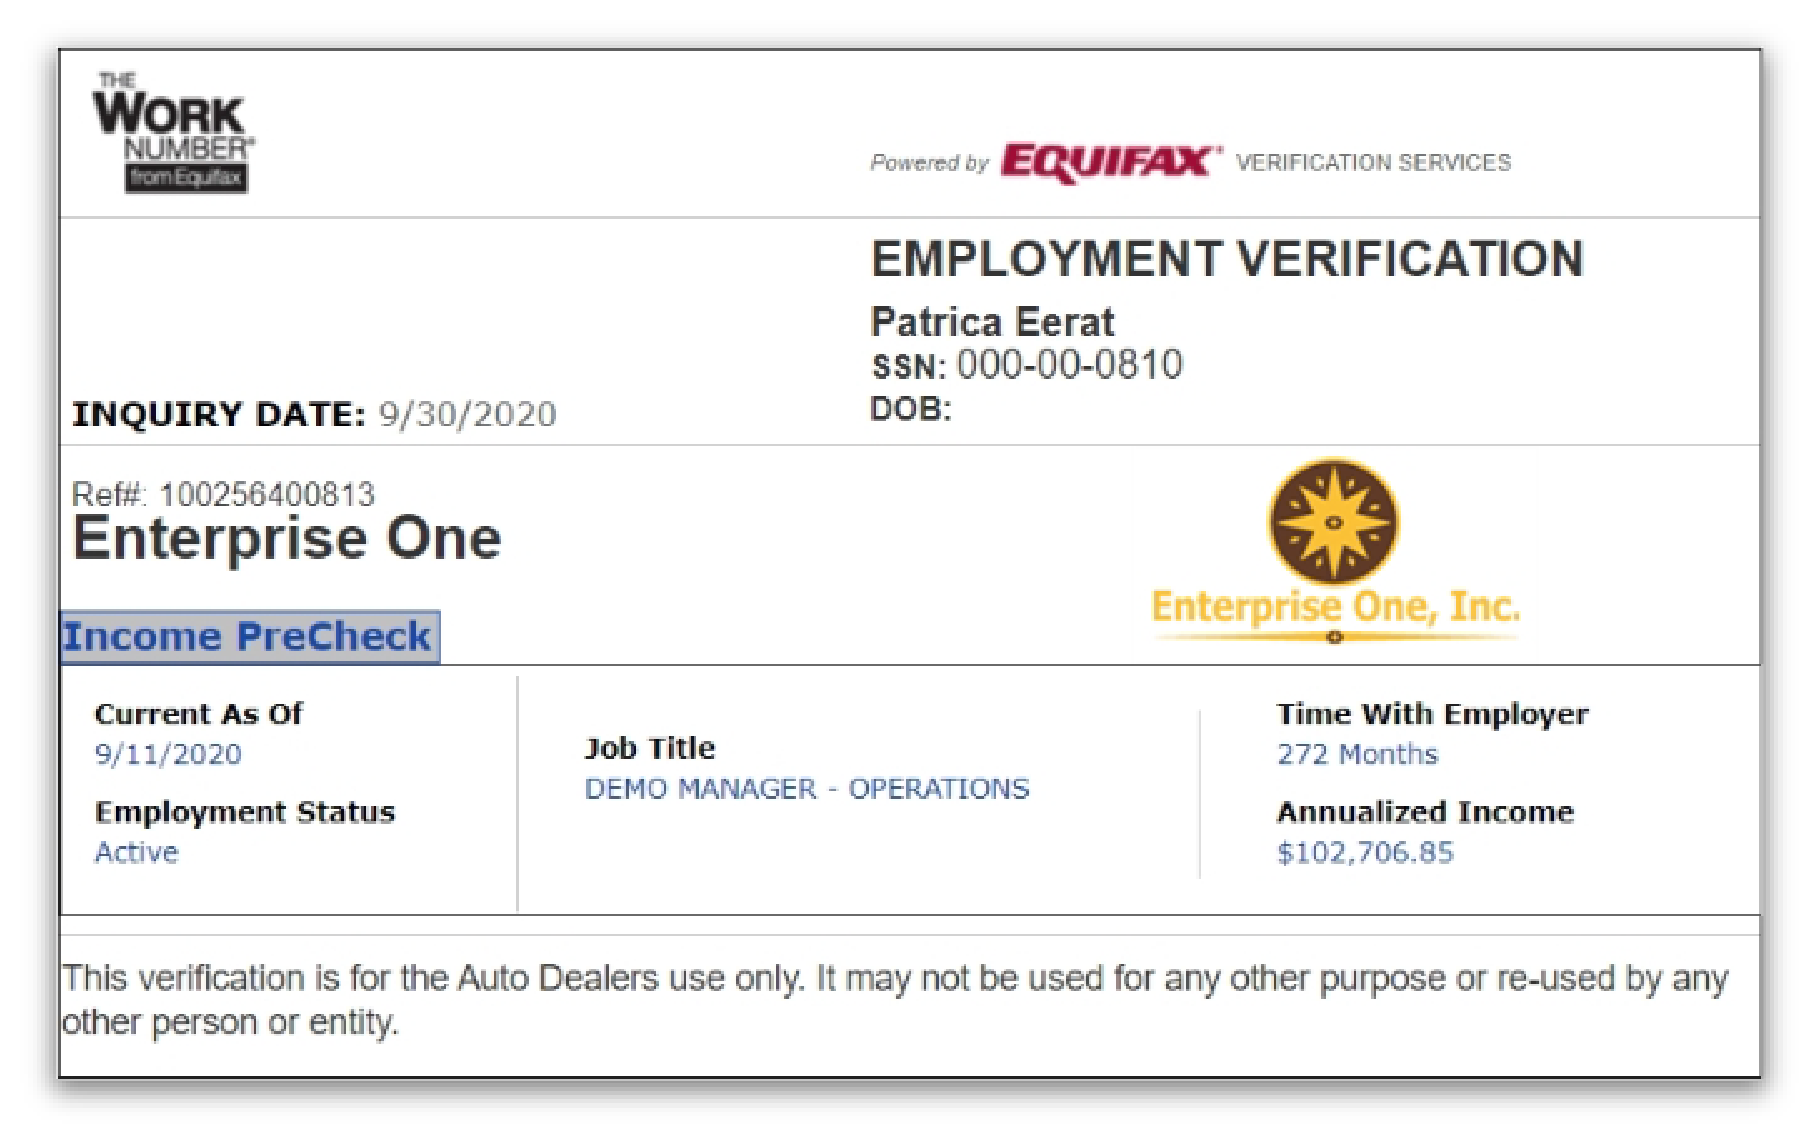 Income Precheck with employment start date, employment status, and income